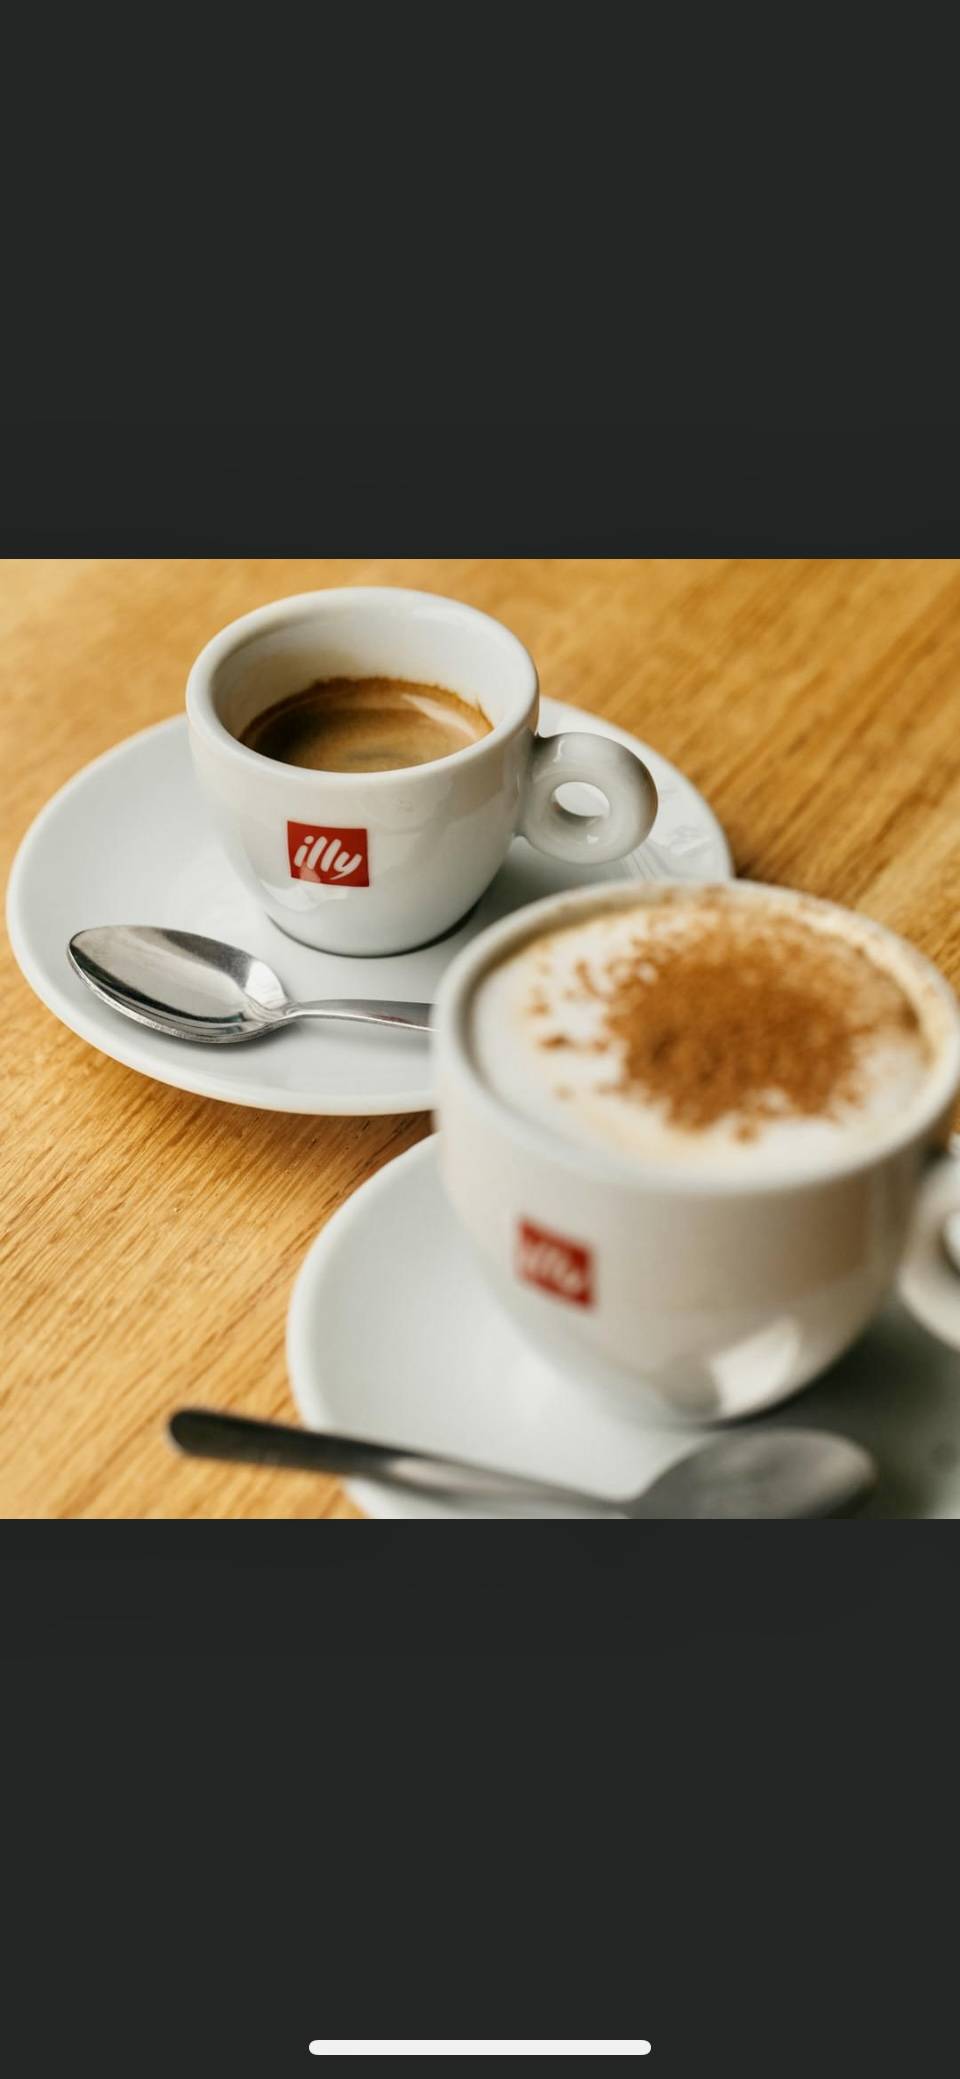 Cappuccino Illy